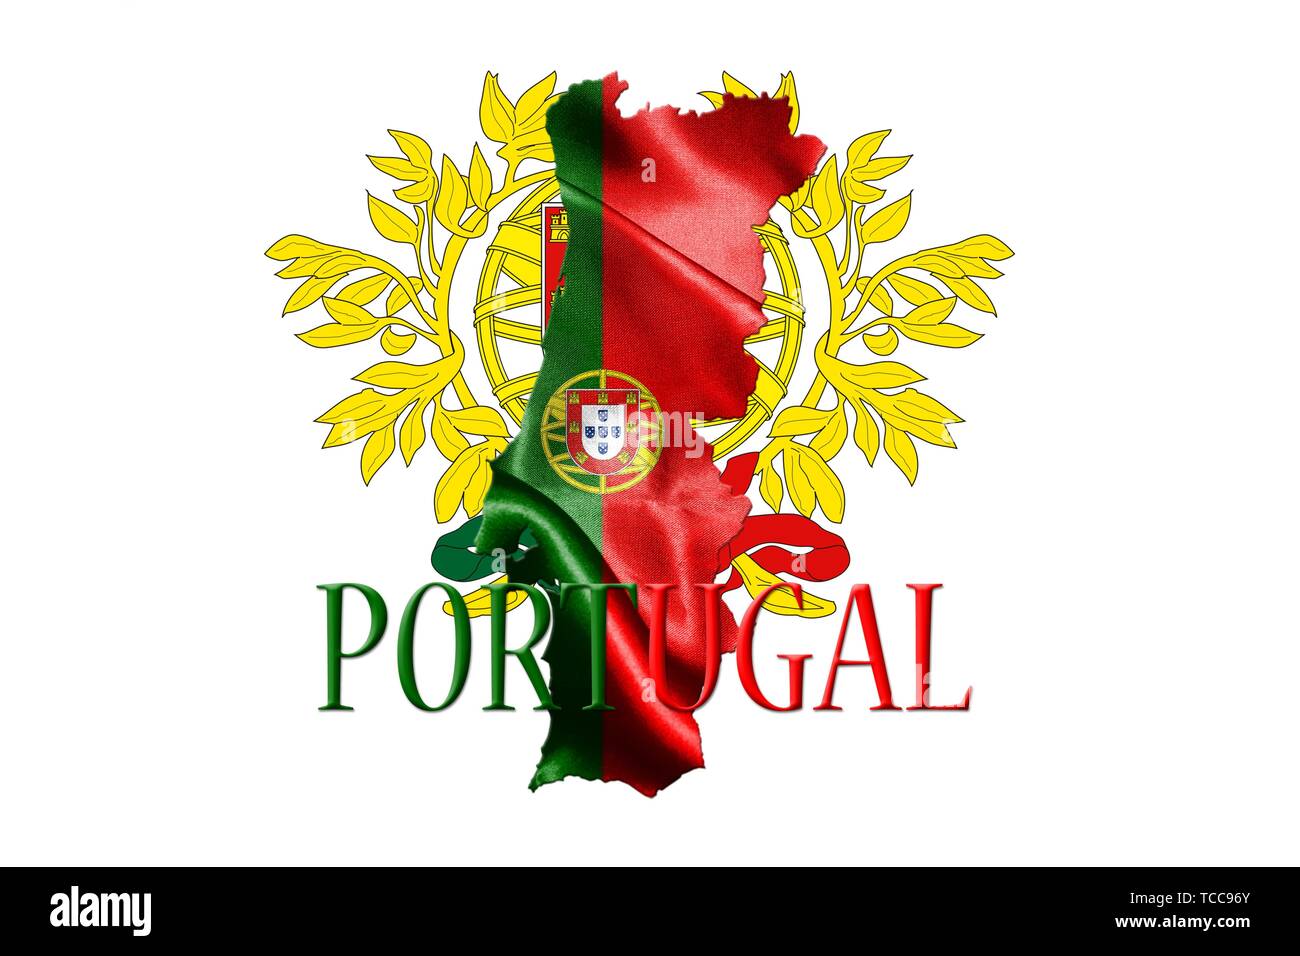 Portugal Physical Map stock vector. Illustration of elevation - 145582273